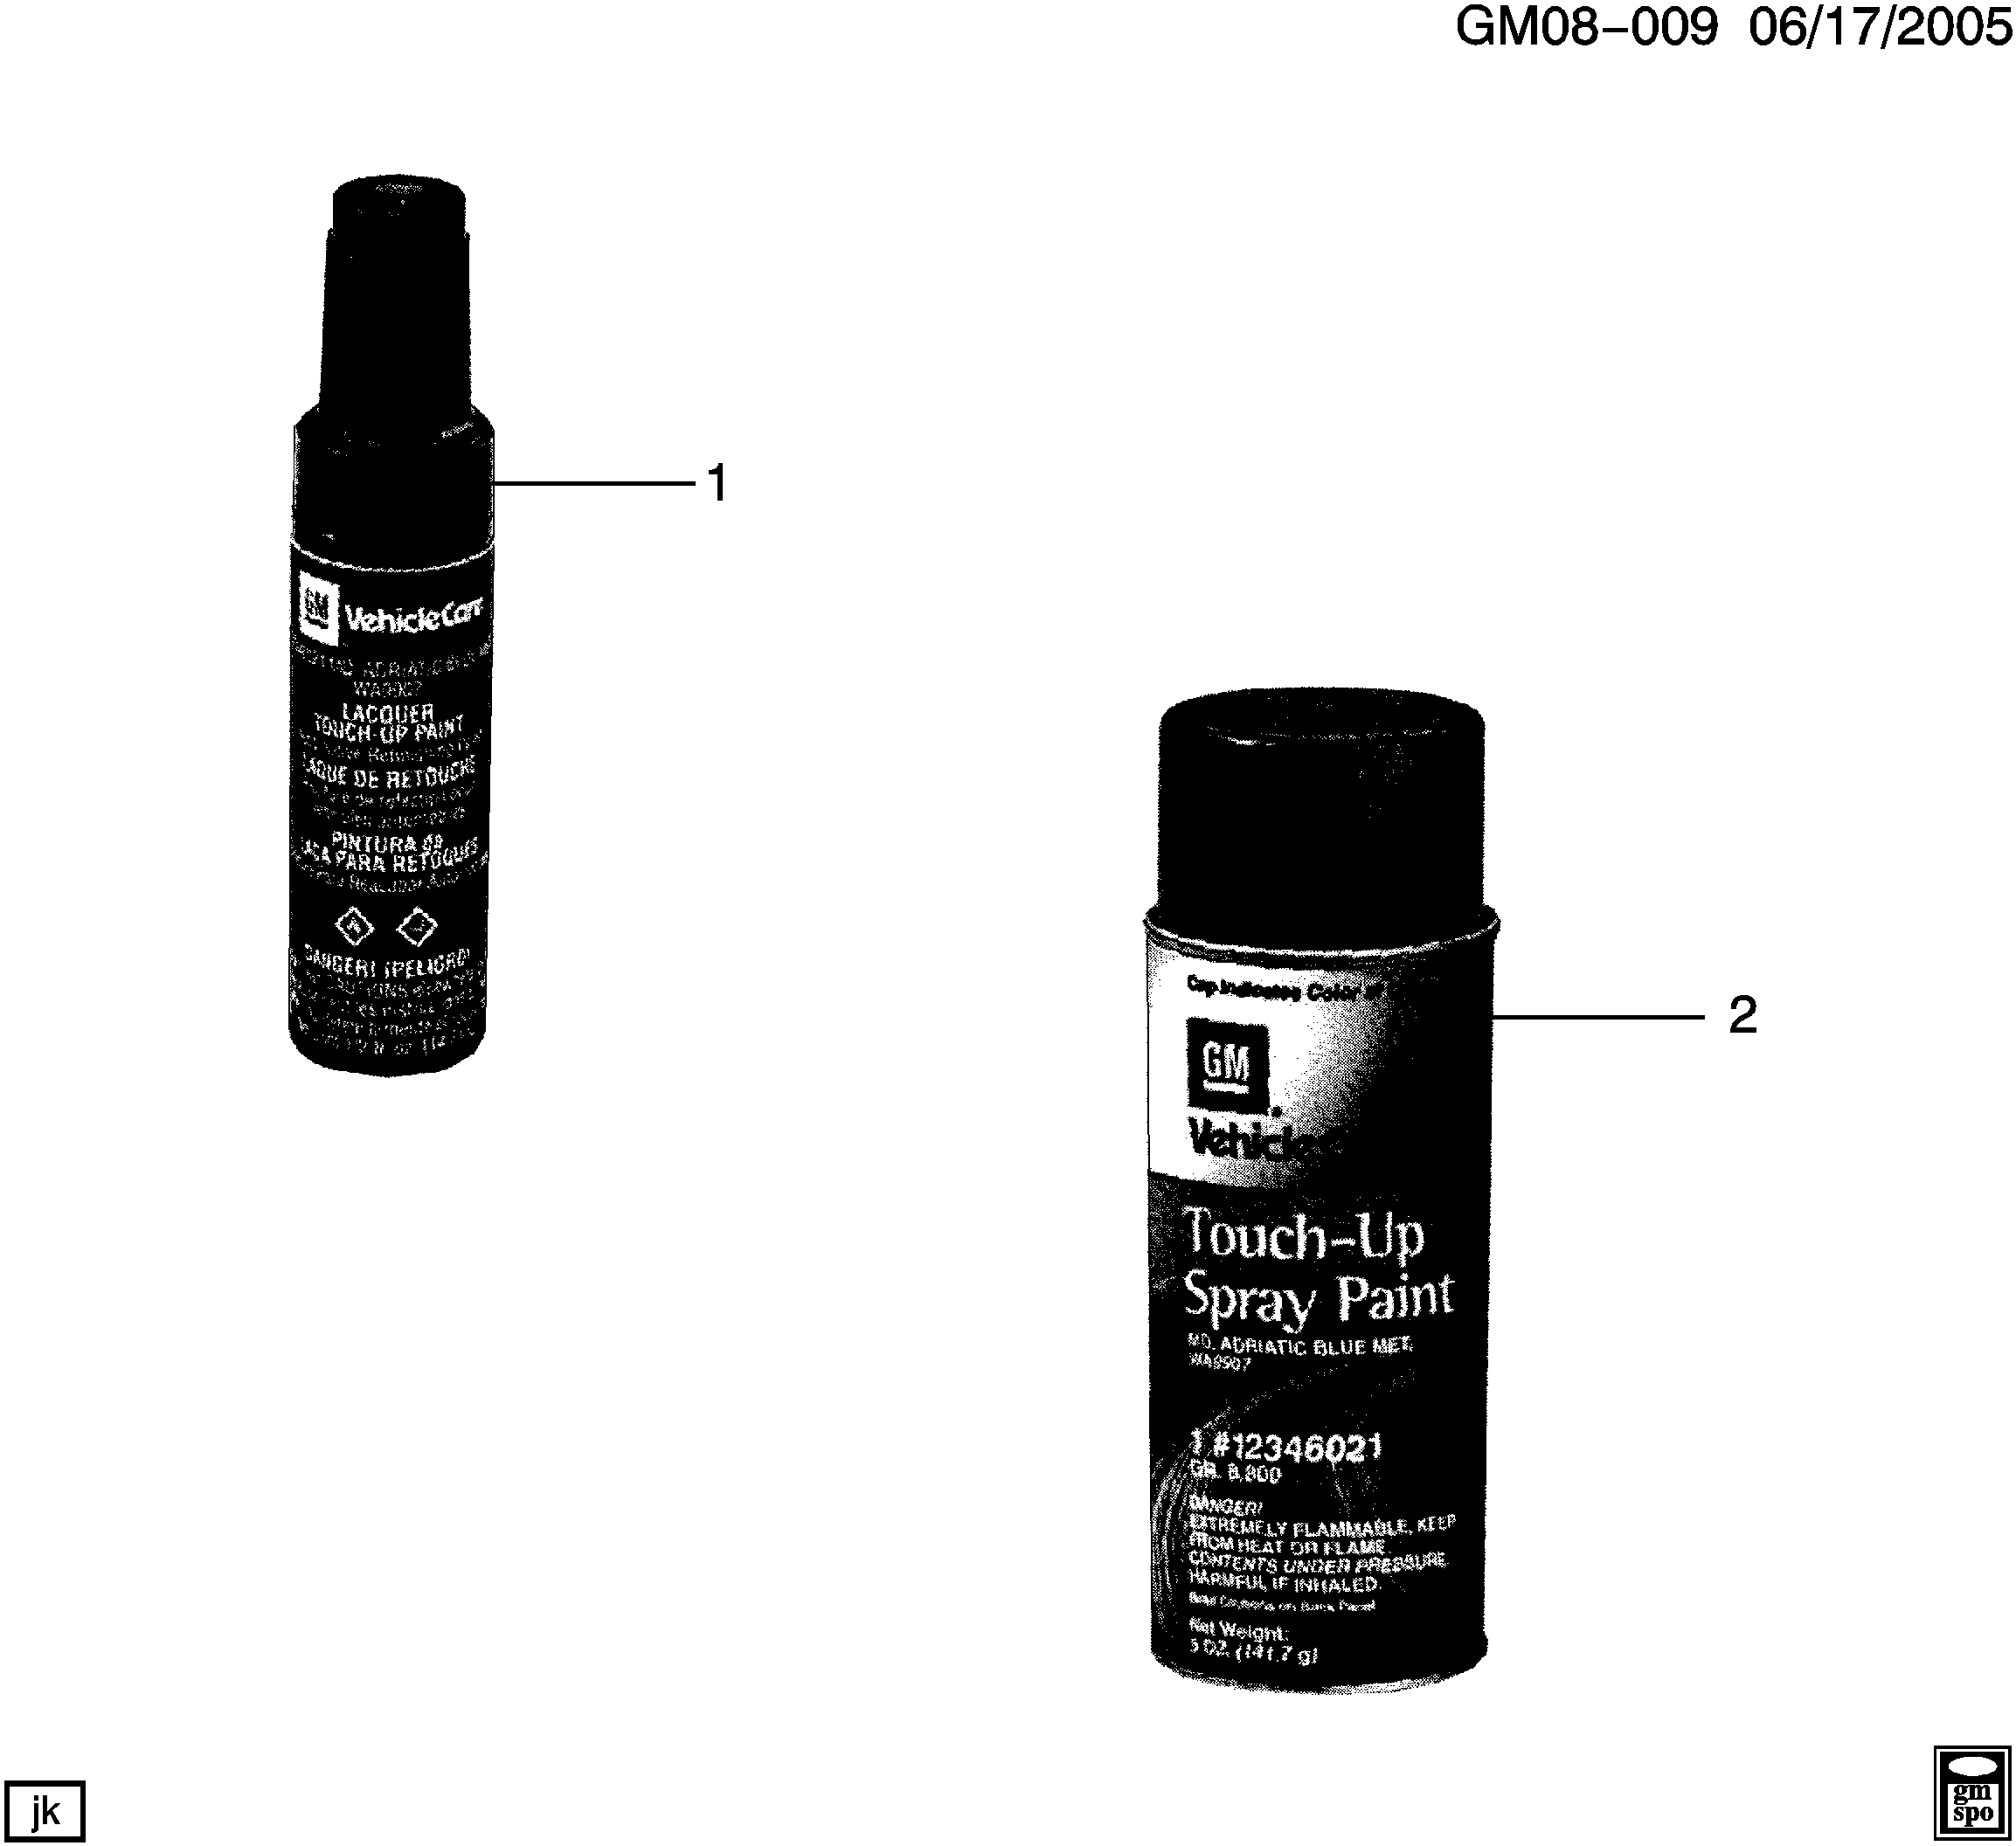 1995-2005 J PAINT/TOUCH-UP